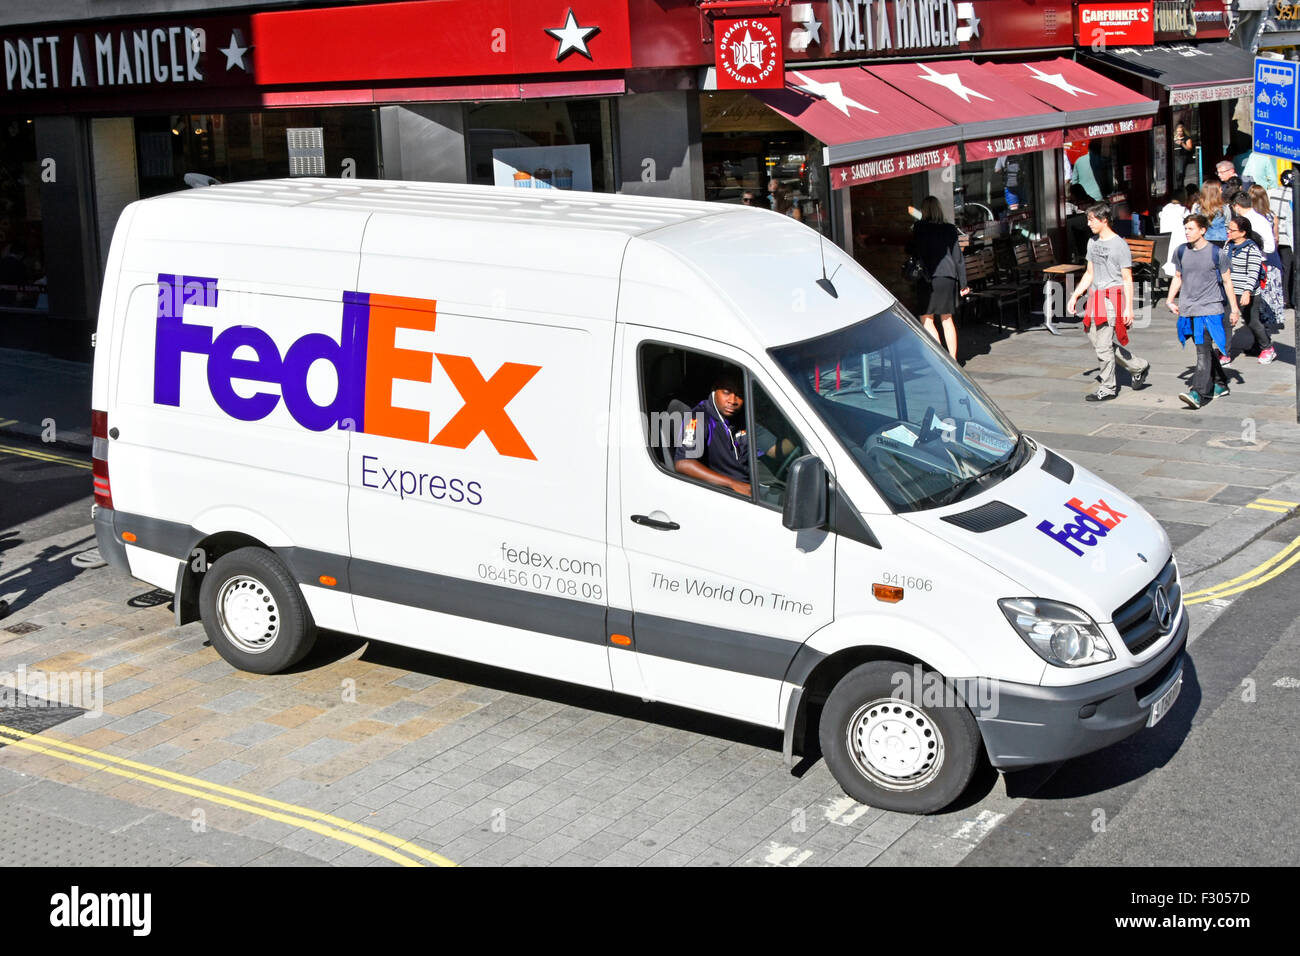 Aerial view looking down on white Fedex express parcels delivery van with brand logo & driver in sunny shopping street scene Strand London England UK Stock Photo